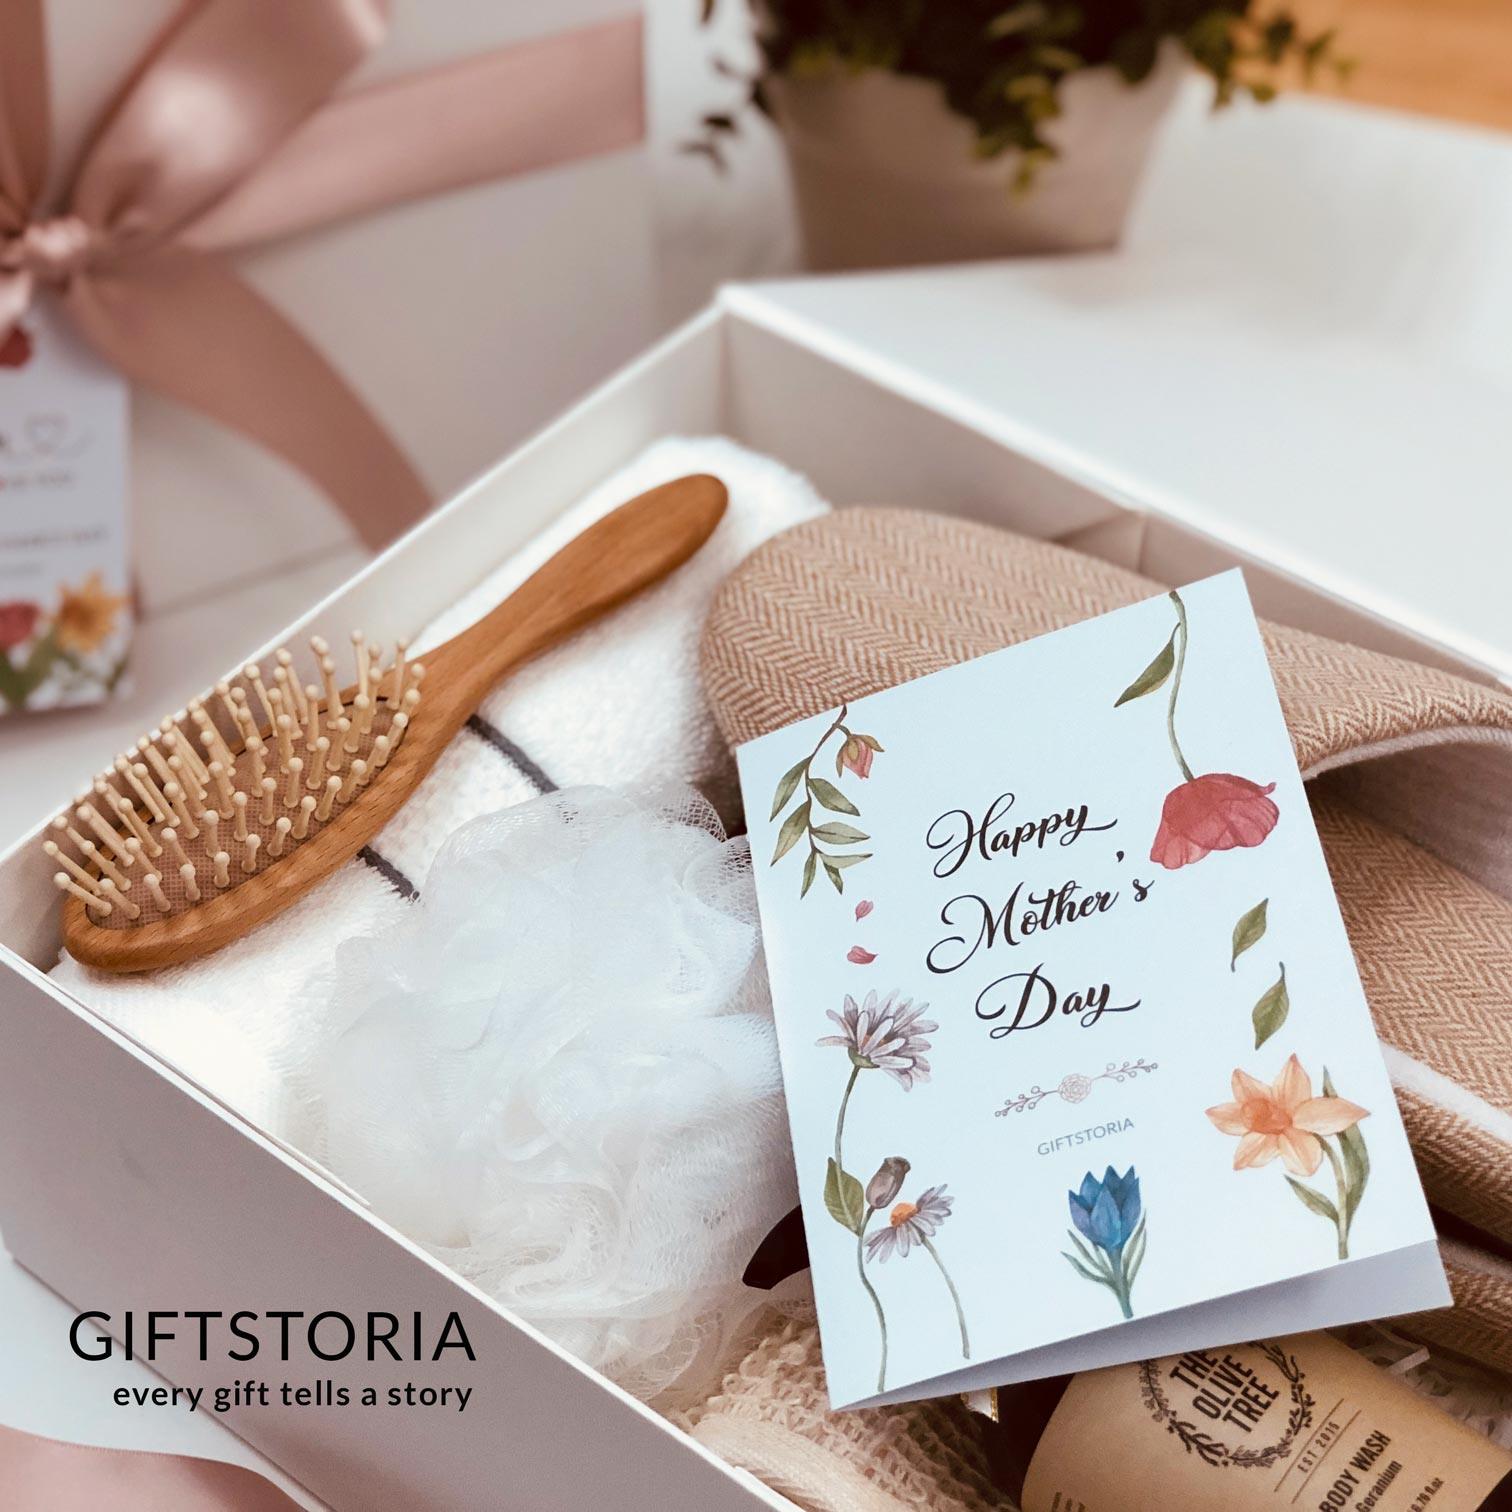 Chill and Unwind Gift Box - Mother's Day (Delivery starts 26th April) - GiftStoria.com